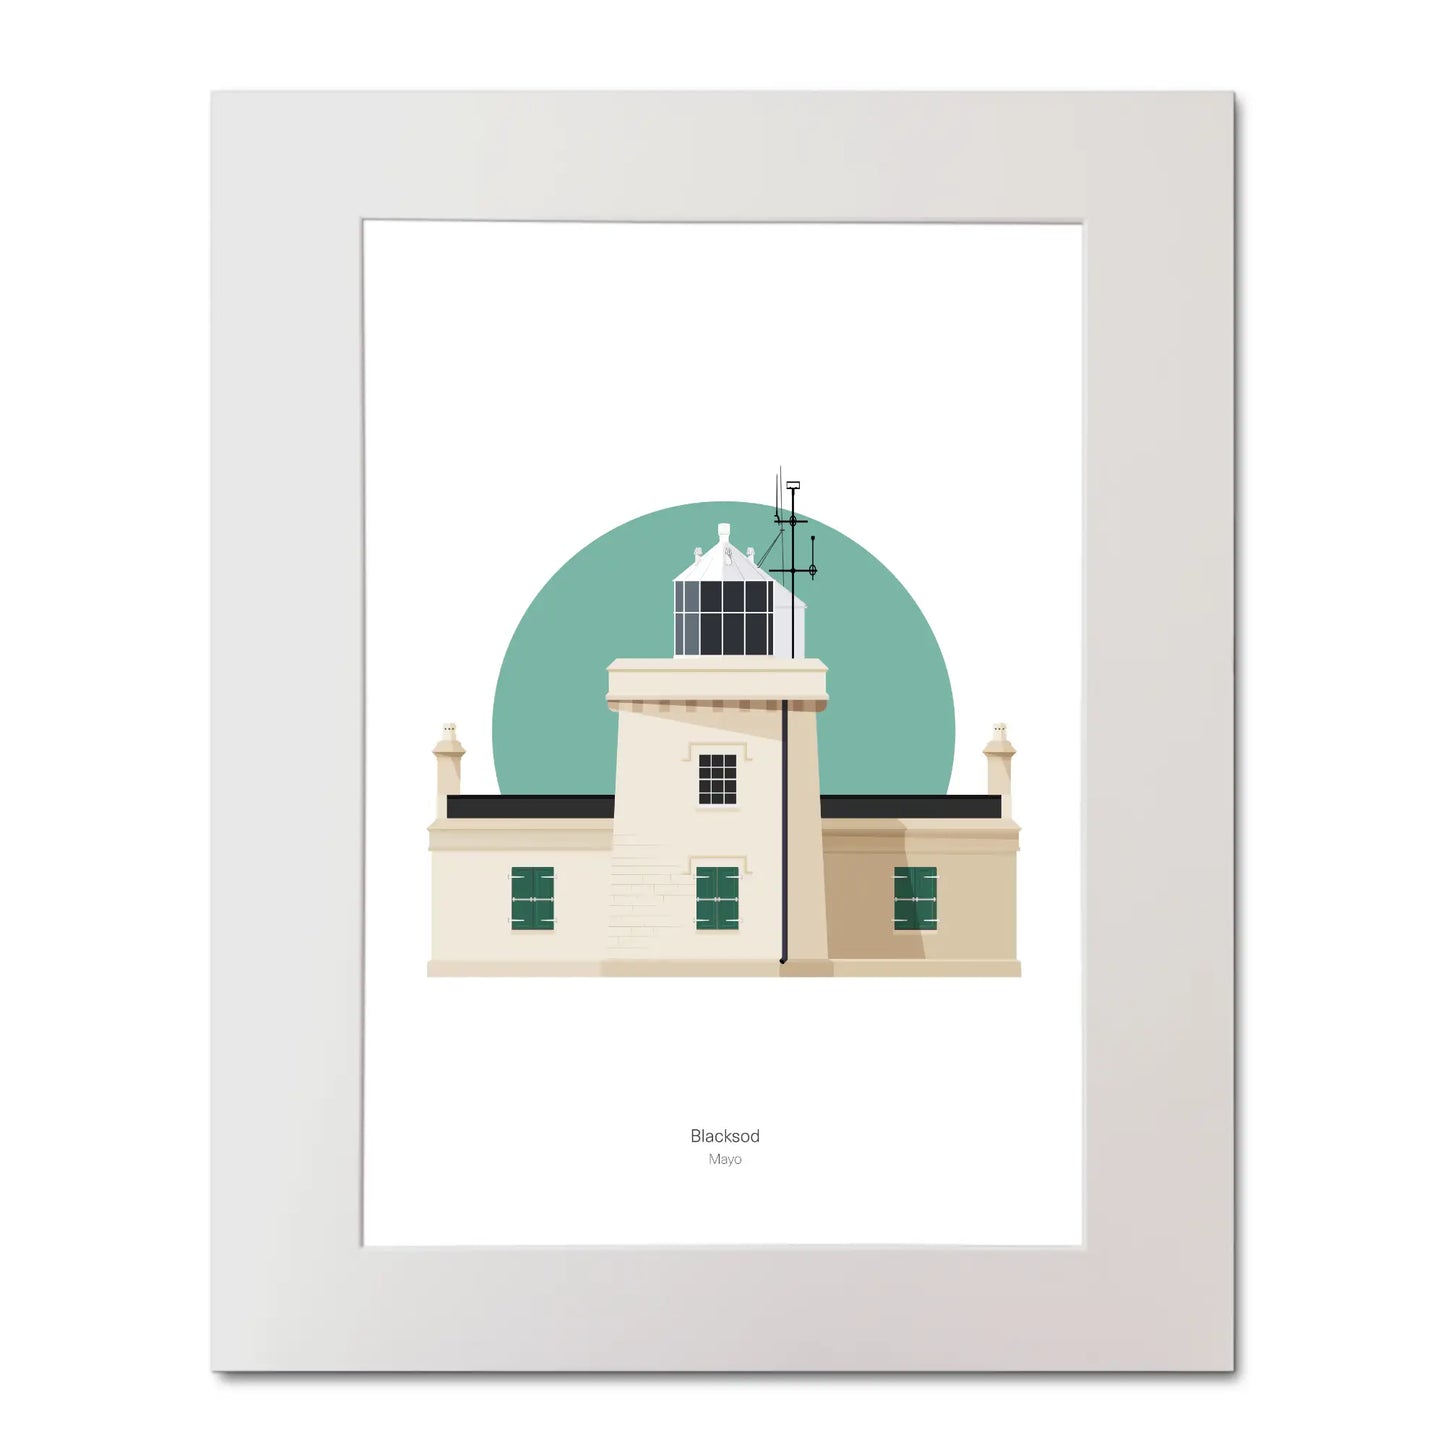 Illustration of Blacksod lighthouse on a white background inside light blue square, mounted and measuring 40x50cm.